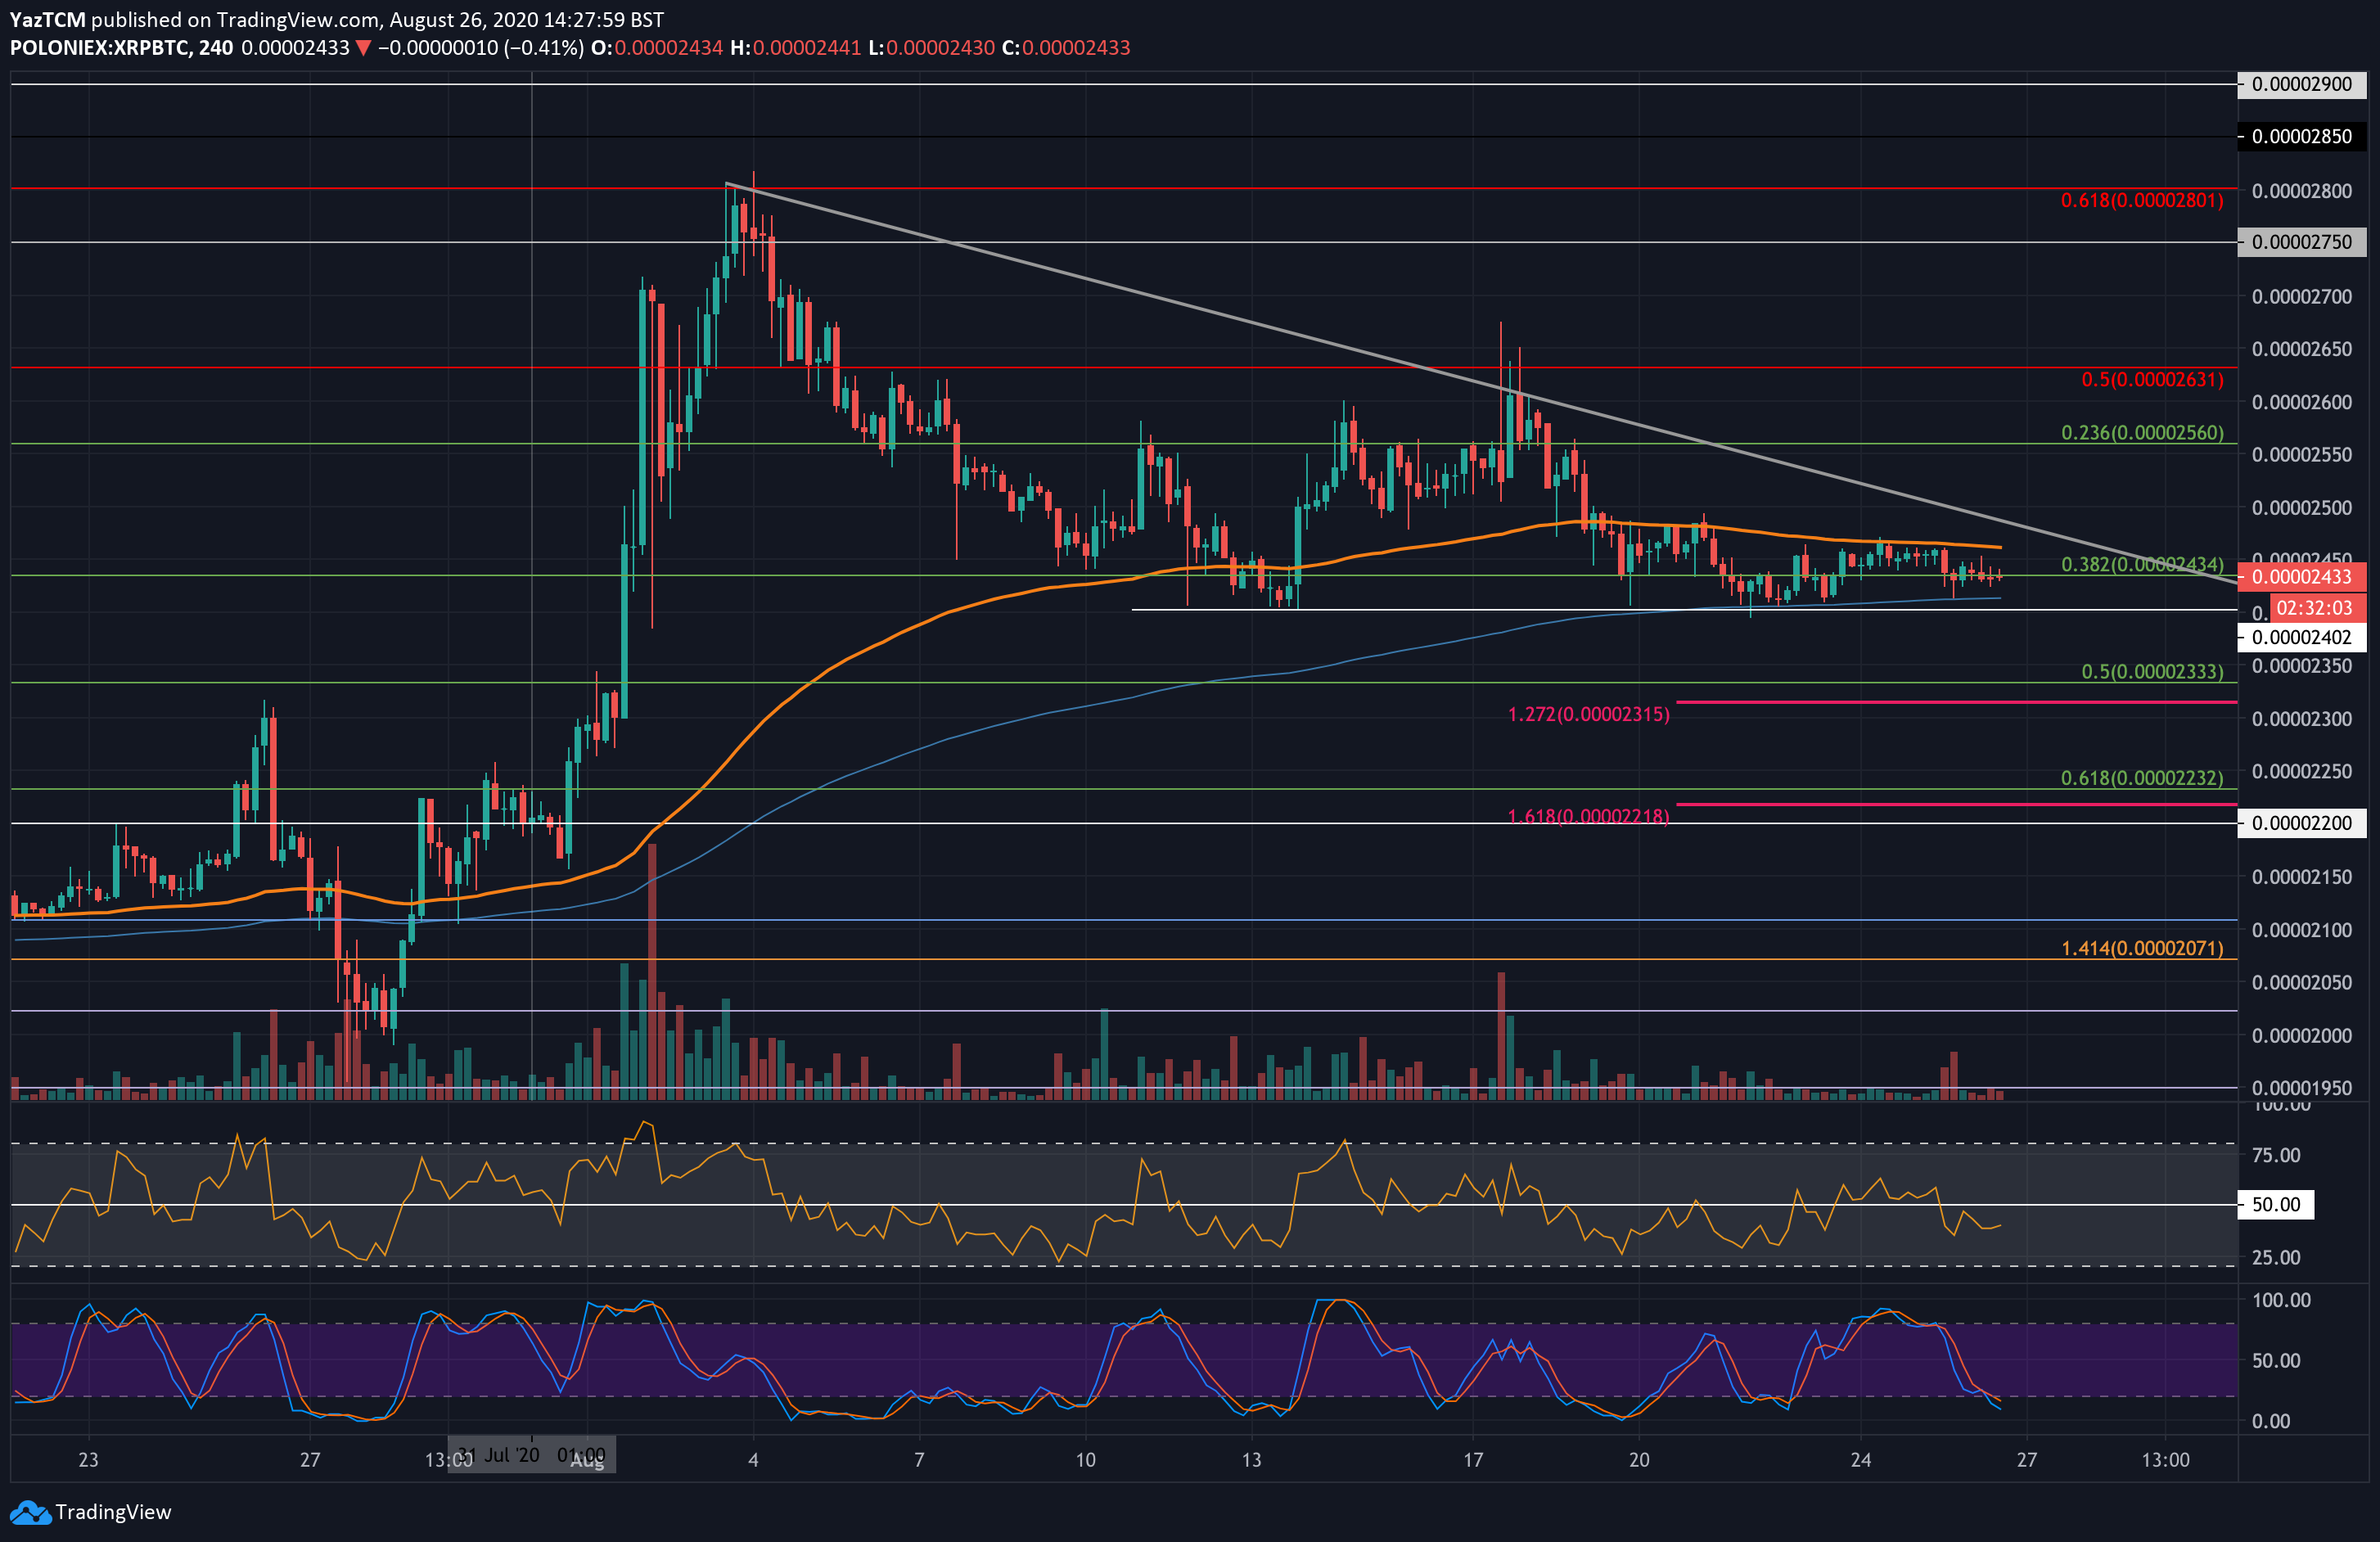 Ripple Price Analysis: Huge Move Expected As XRP Reaching Triangle’s Apex